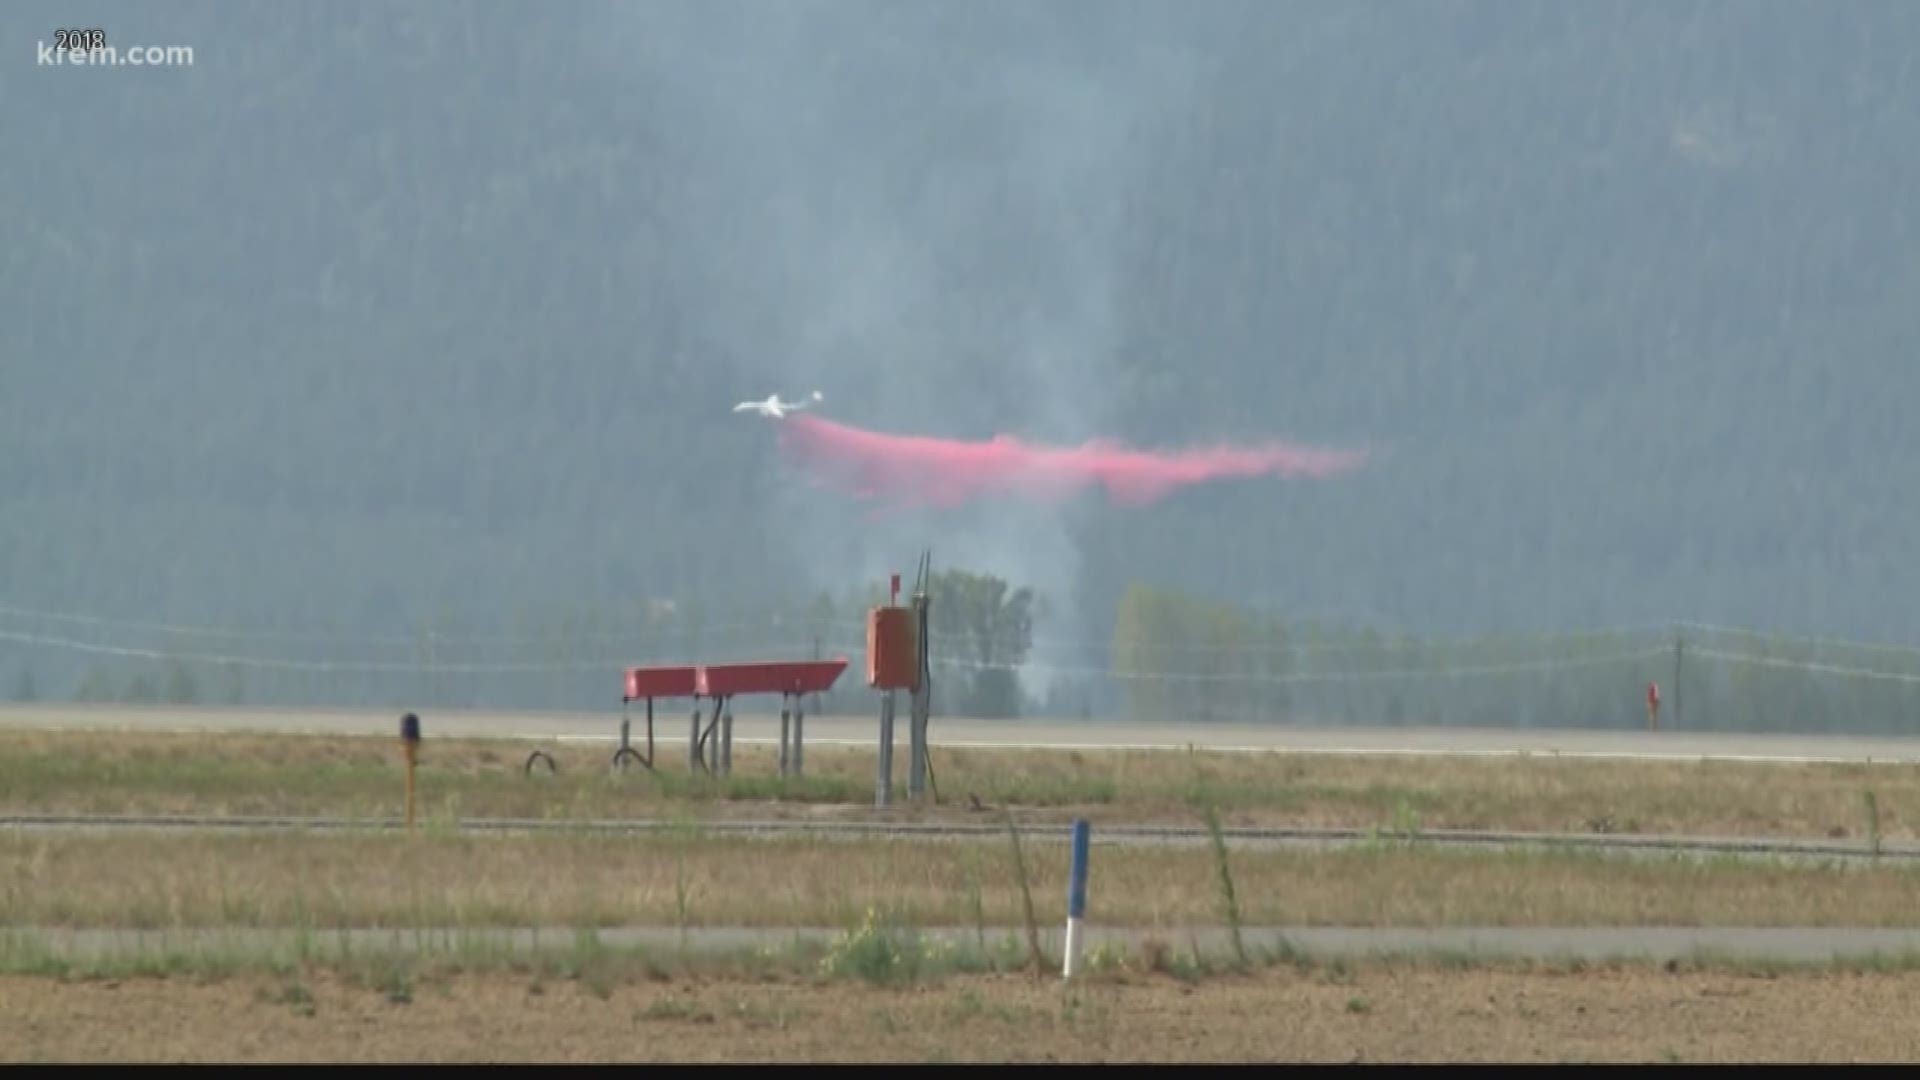 Firefighting planes in North Idaho have been using less fire retardant compared to the past couple of years. You might not know it, but many of those air tankers fill up with retardant near Coeur d'Alene's airport. We wanted to know how busy those planes have been this season.